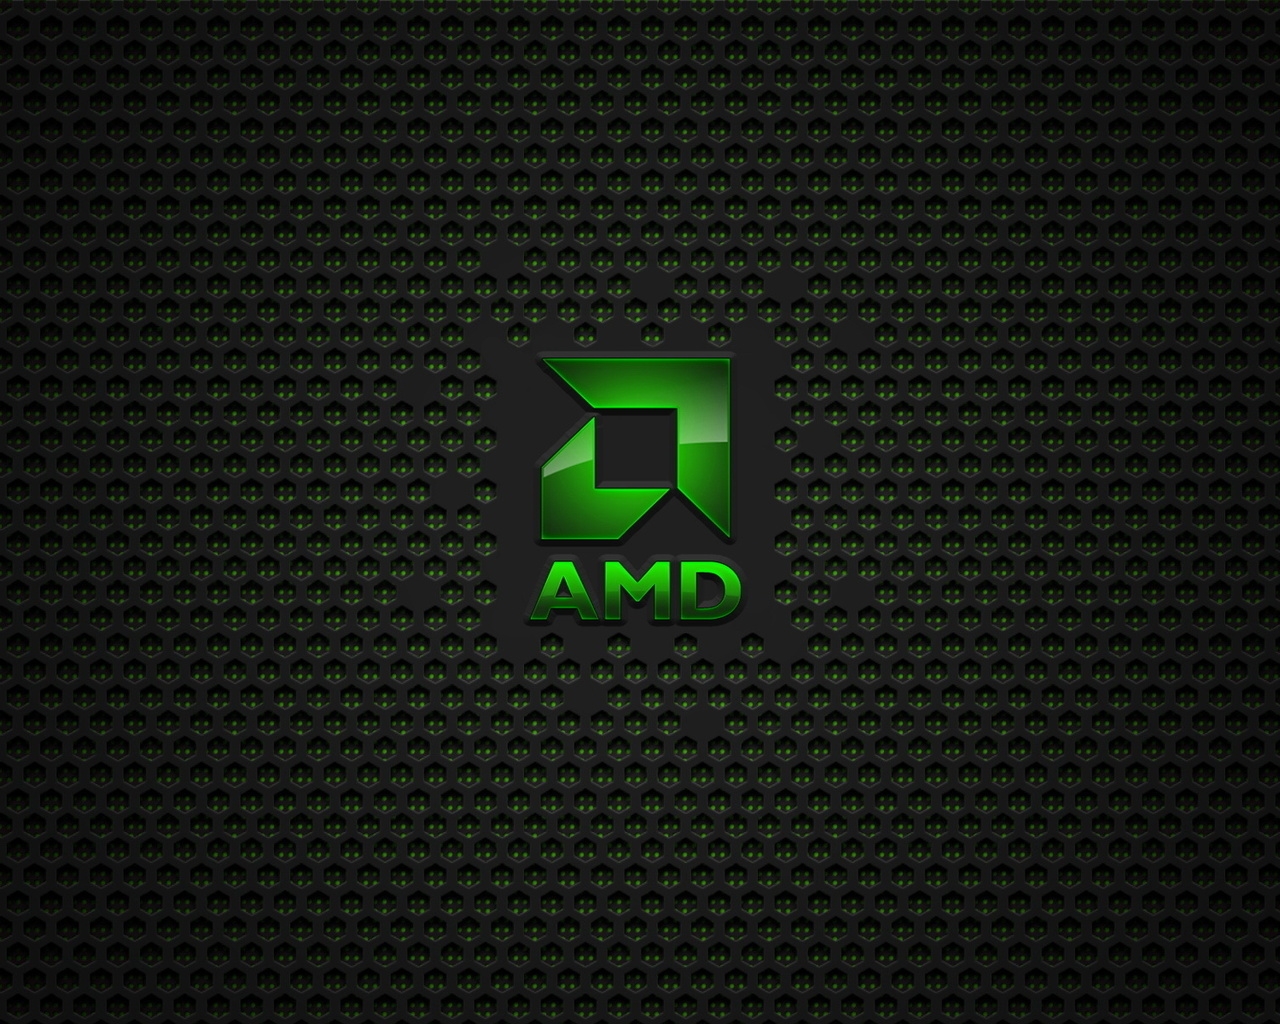 AMD for 1280 x 1024 resolution